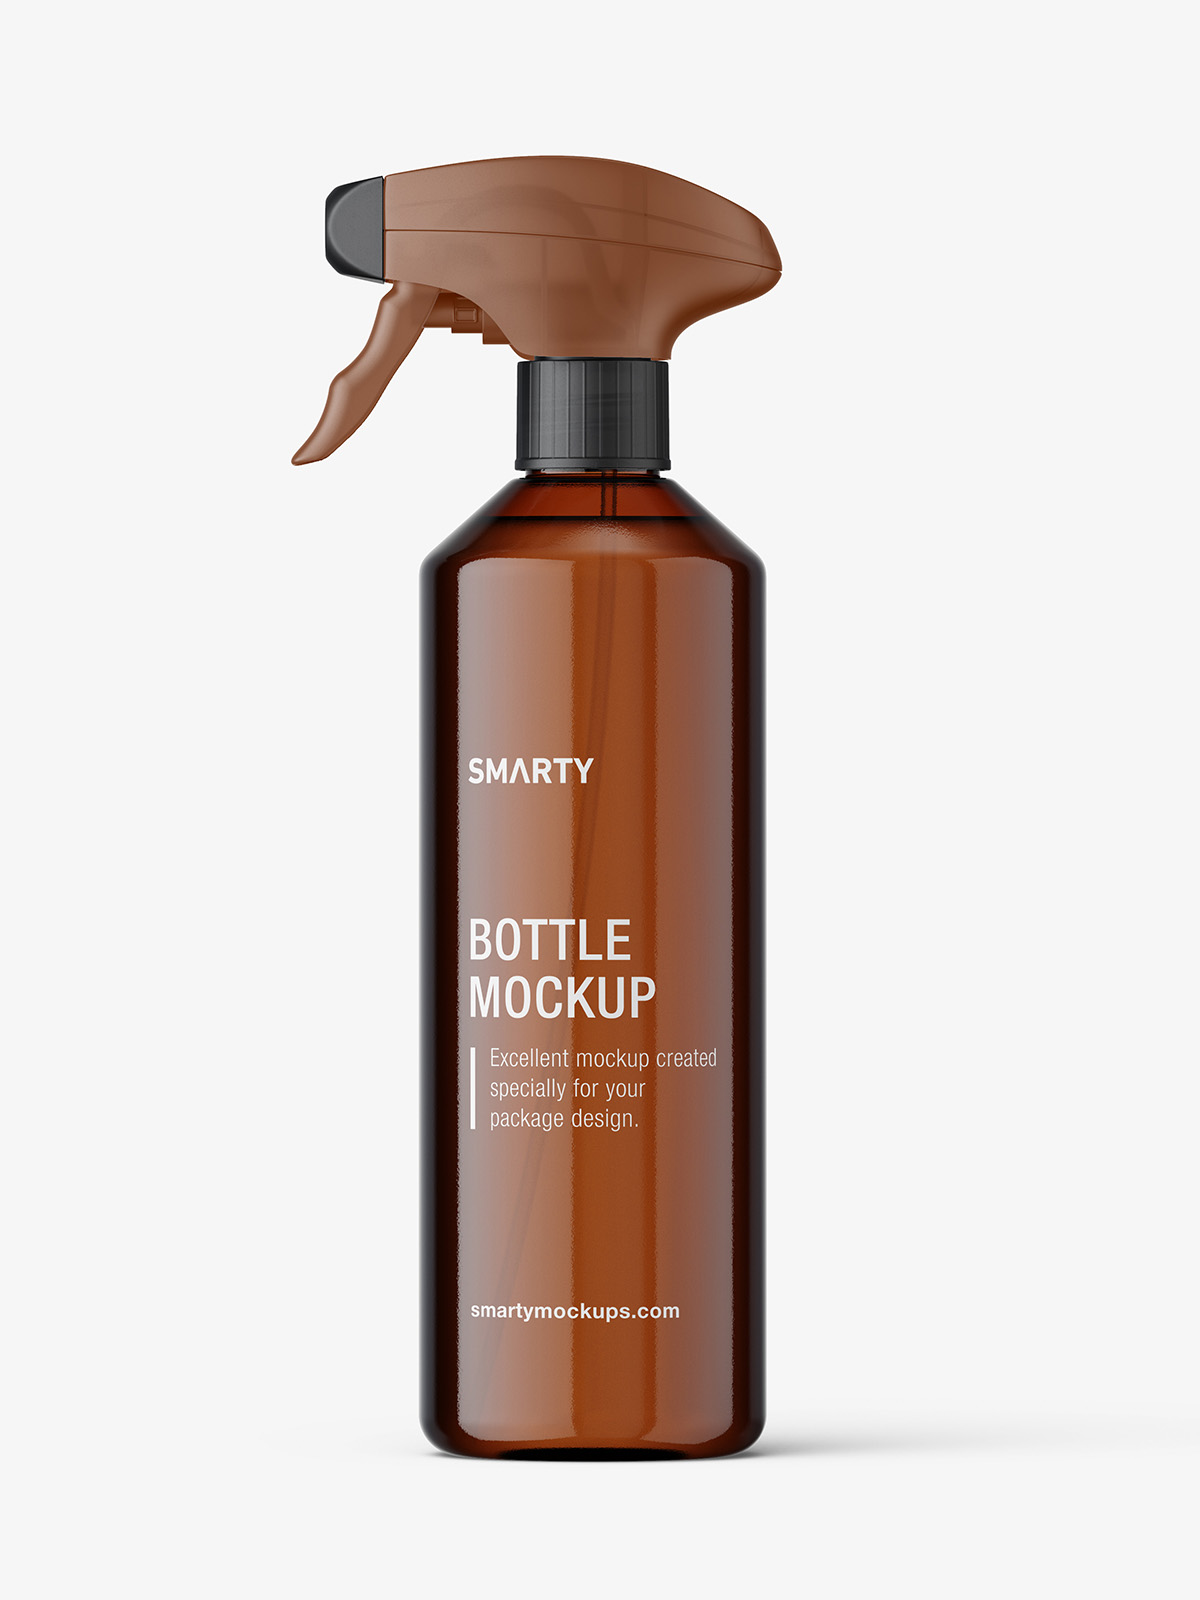 Download Bottle With Trigger Spray Mockup Amber Smarty Mockups Yellowimages Mockups